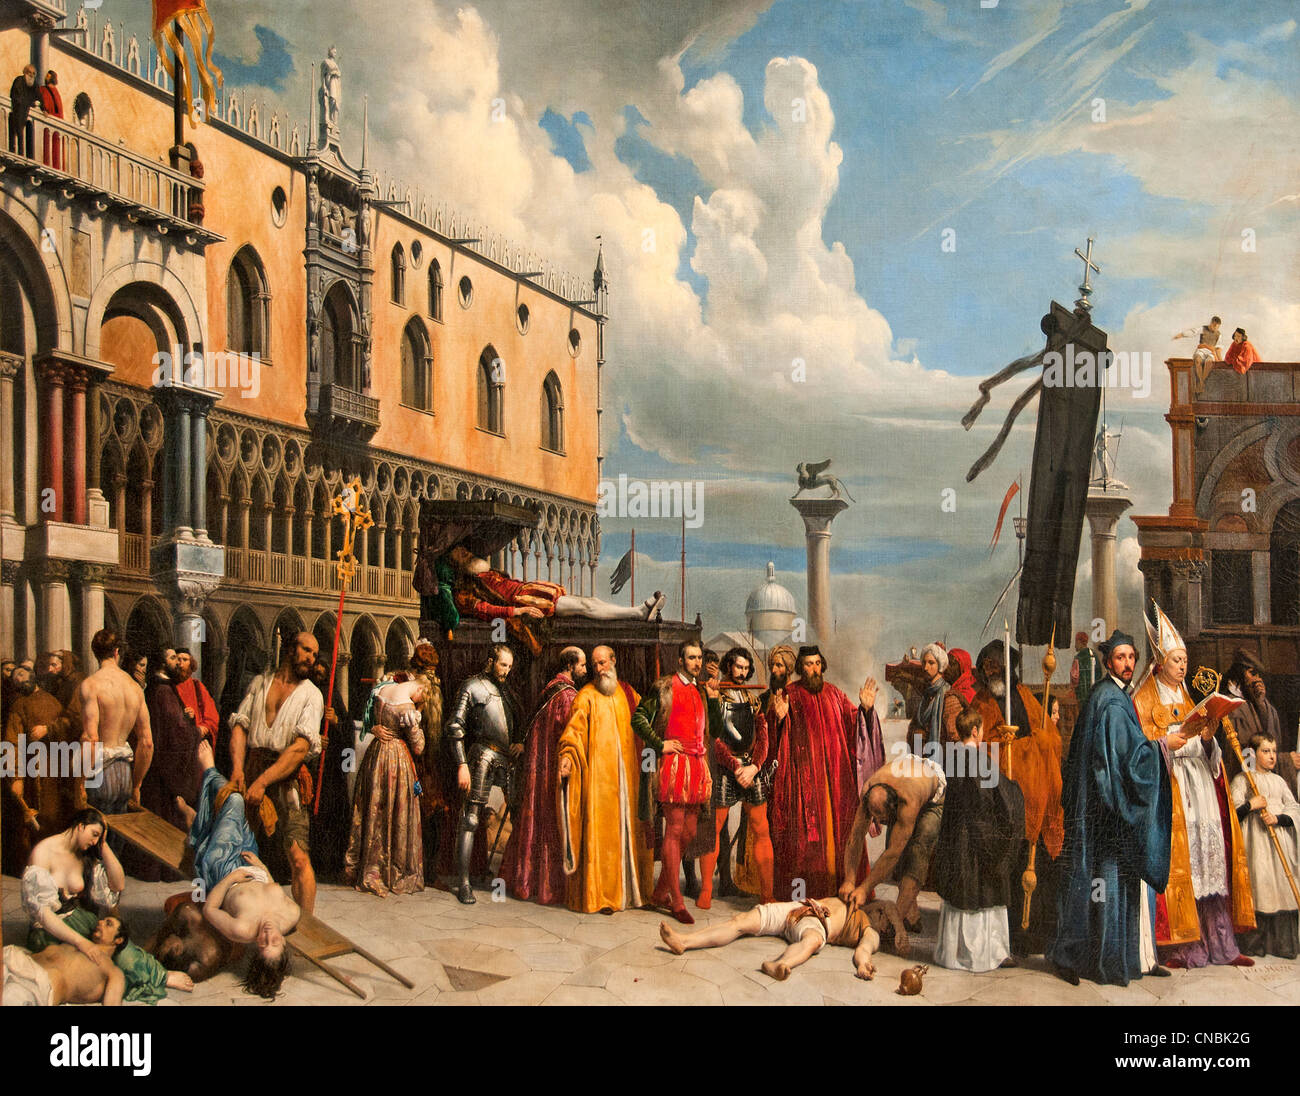 Collection 104+ Images in 1576, which italian painter died of the plague in venice? Updated